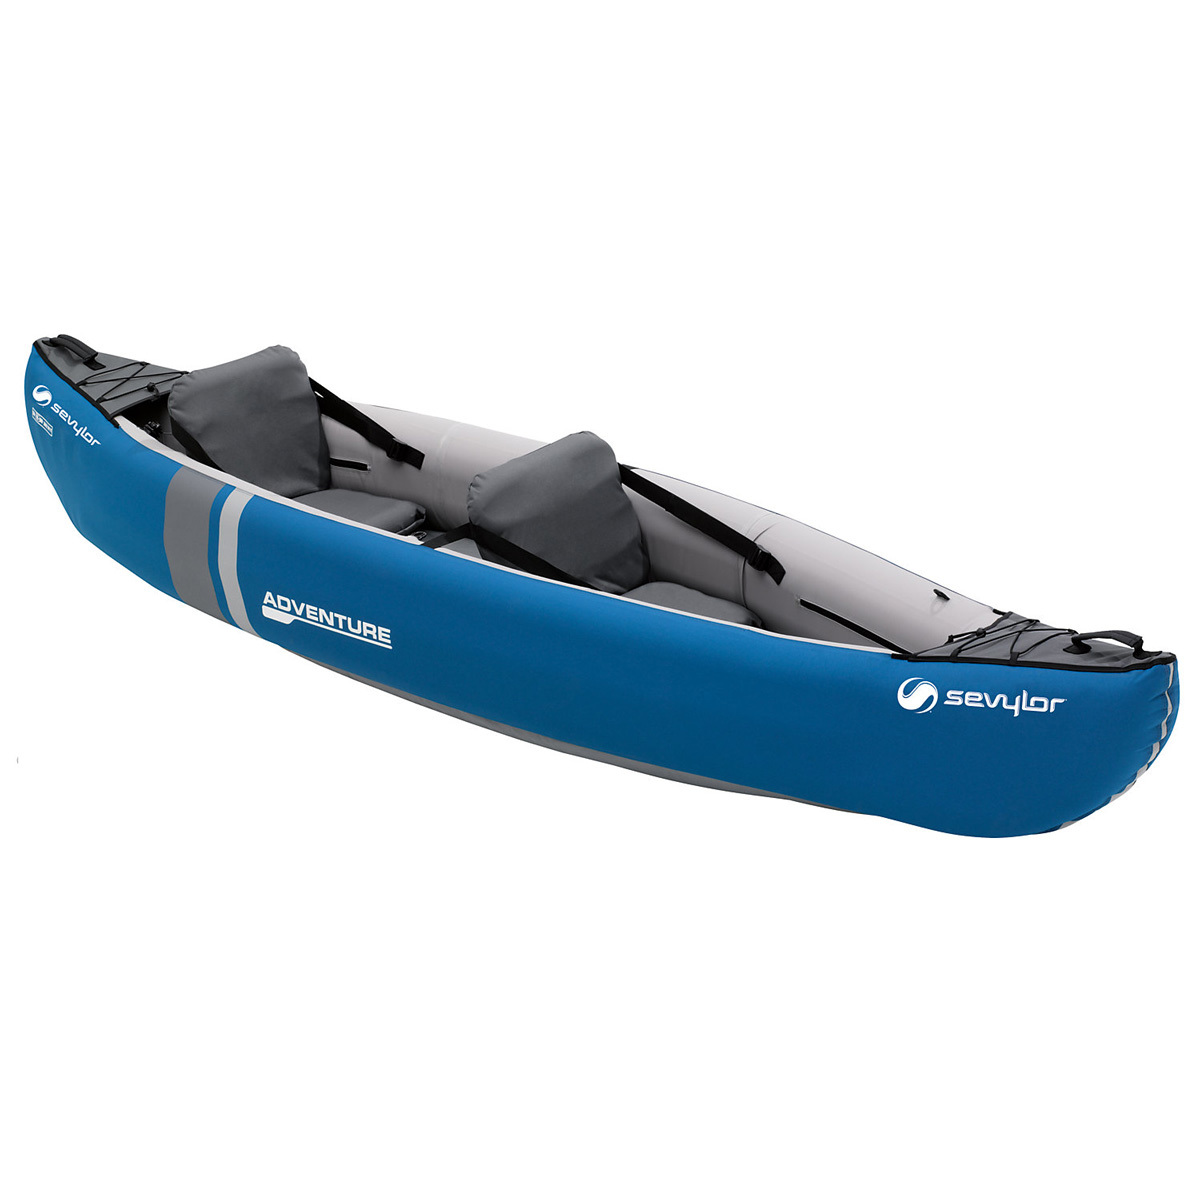 Sevylor Adventure Kit 10.3ft (314cm) 2 Person Inflatable Kayak with 2 Section Oars and Foot Pump